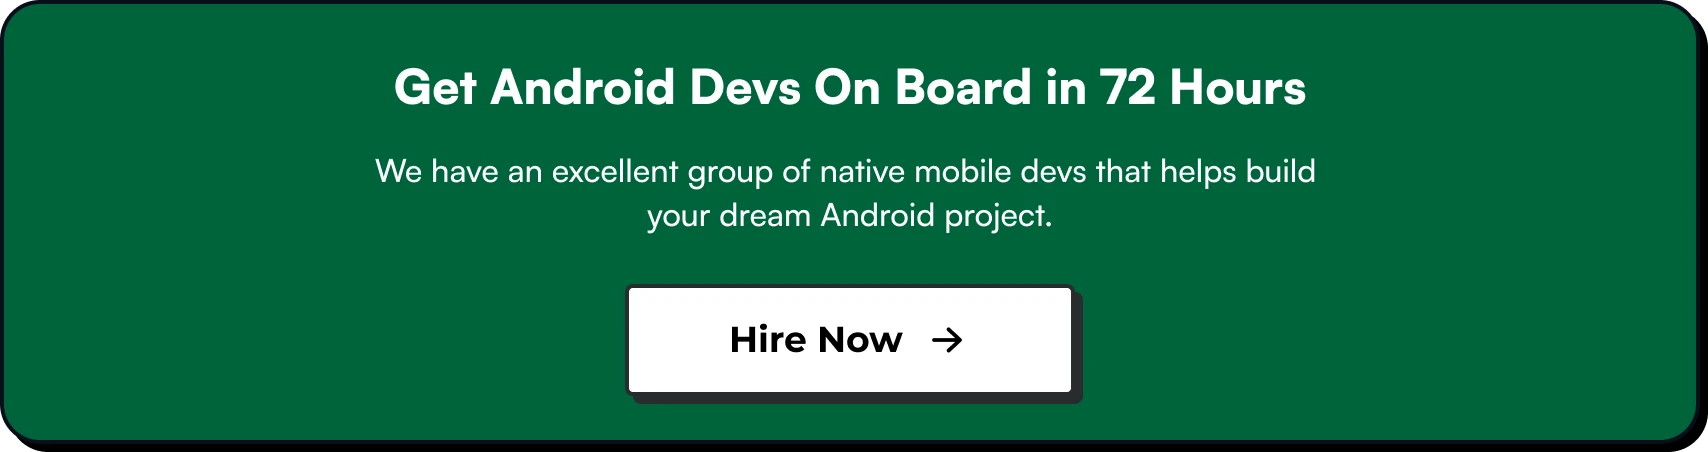 Get Android developers On board via dedicated model contract in 72 Hours